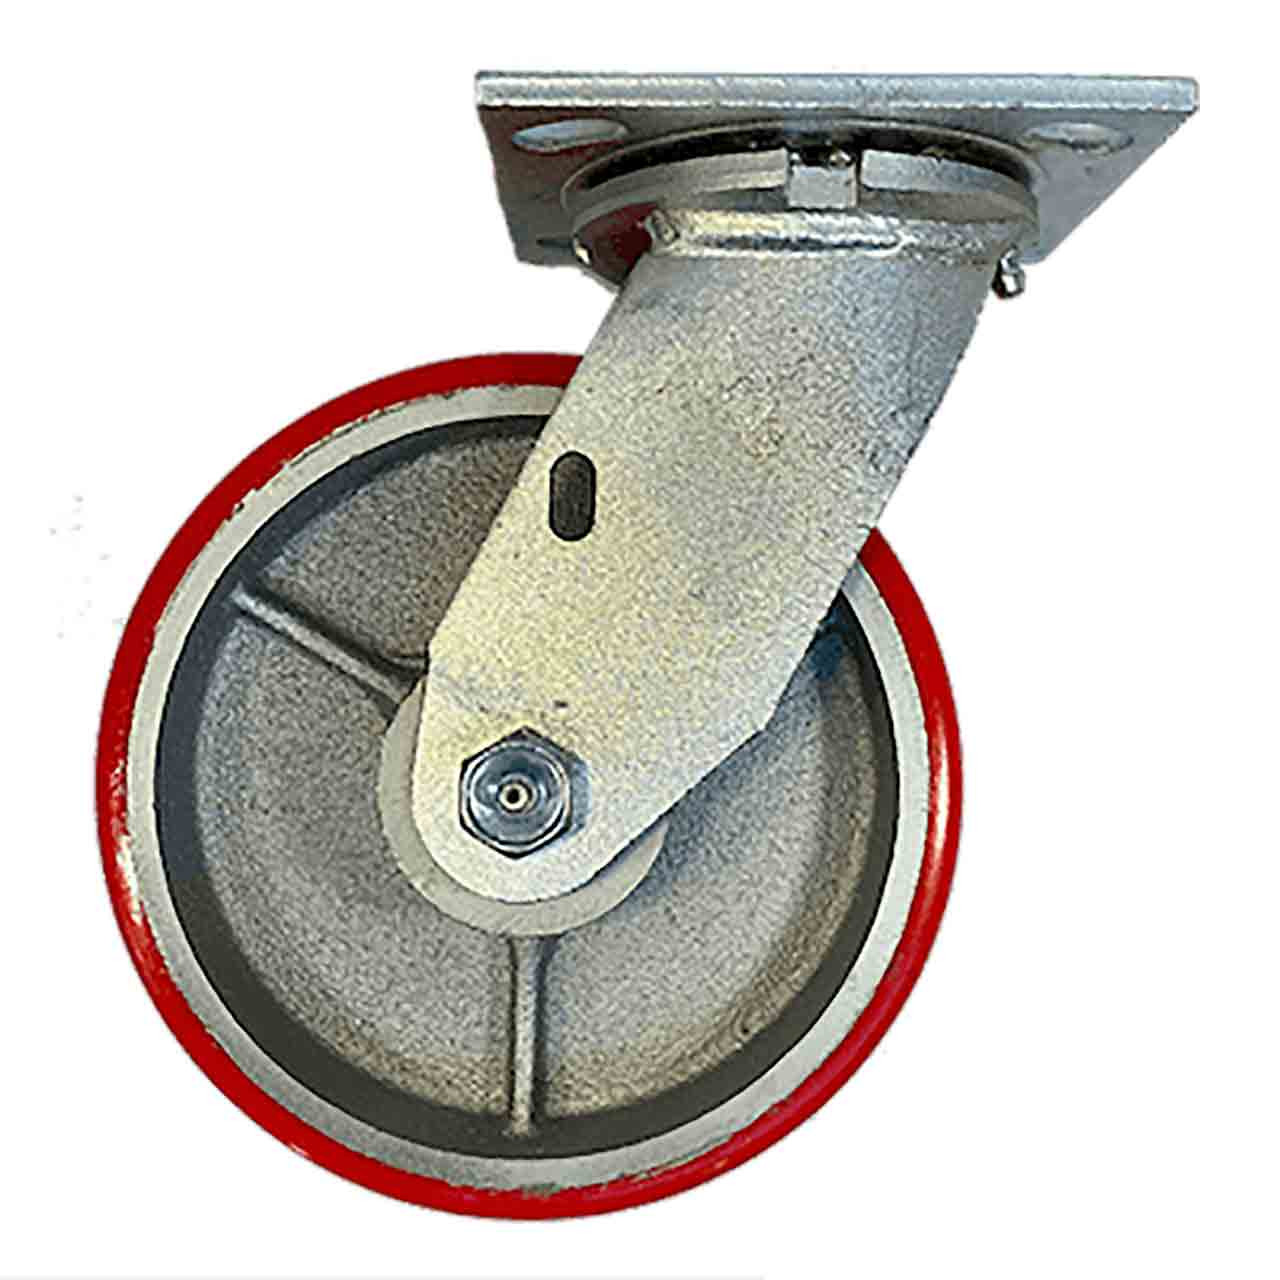 heavy duty swivel caster with capacity up to 1,200 lbs with red poly-on-steel wheel.